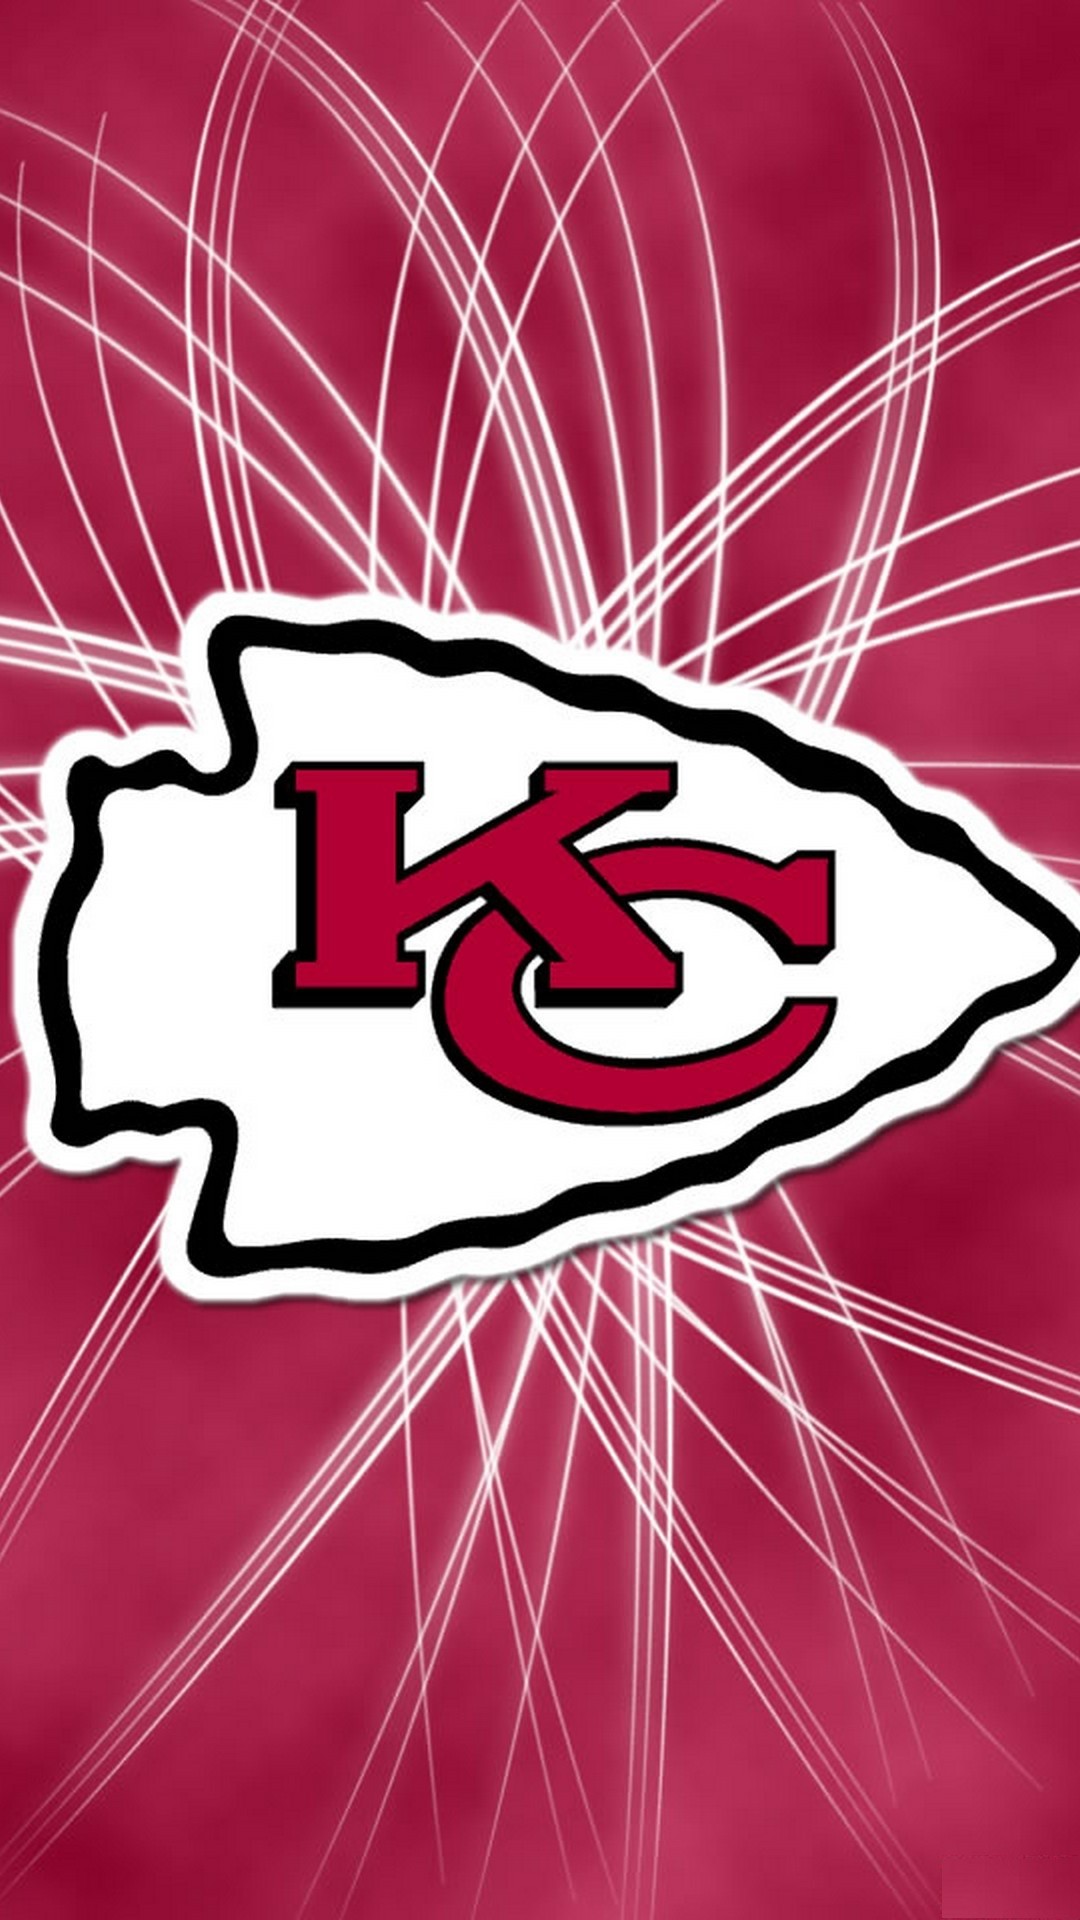 Kansas City Chiefs NFL iPhone Screen Lock Wallpaper With high-resolution 1080X1920 pixel. Download and set as wallpaper for Desktop Computer, Apple iPhone X, XS Max, XR, 8, 7, 6, SE, iPad, Android